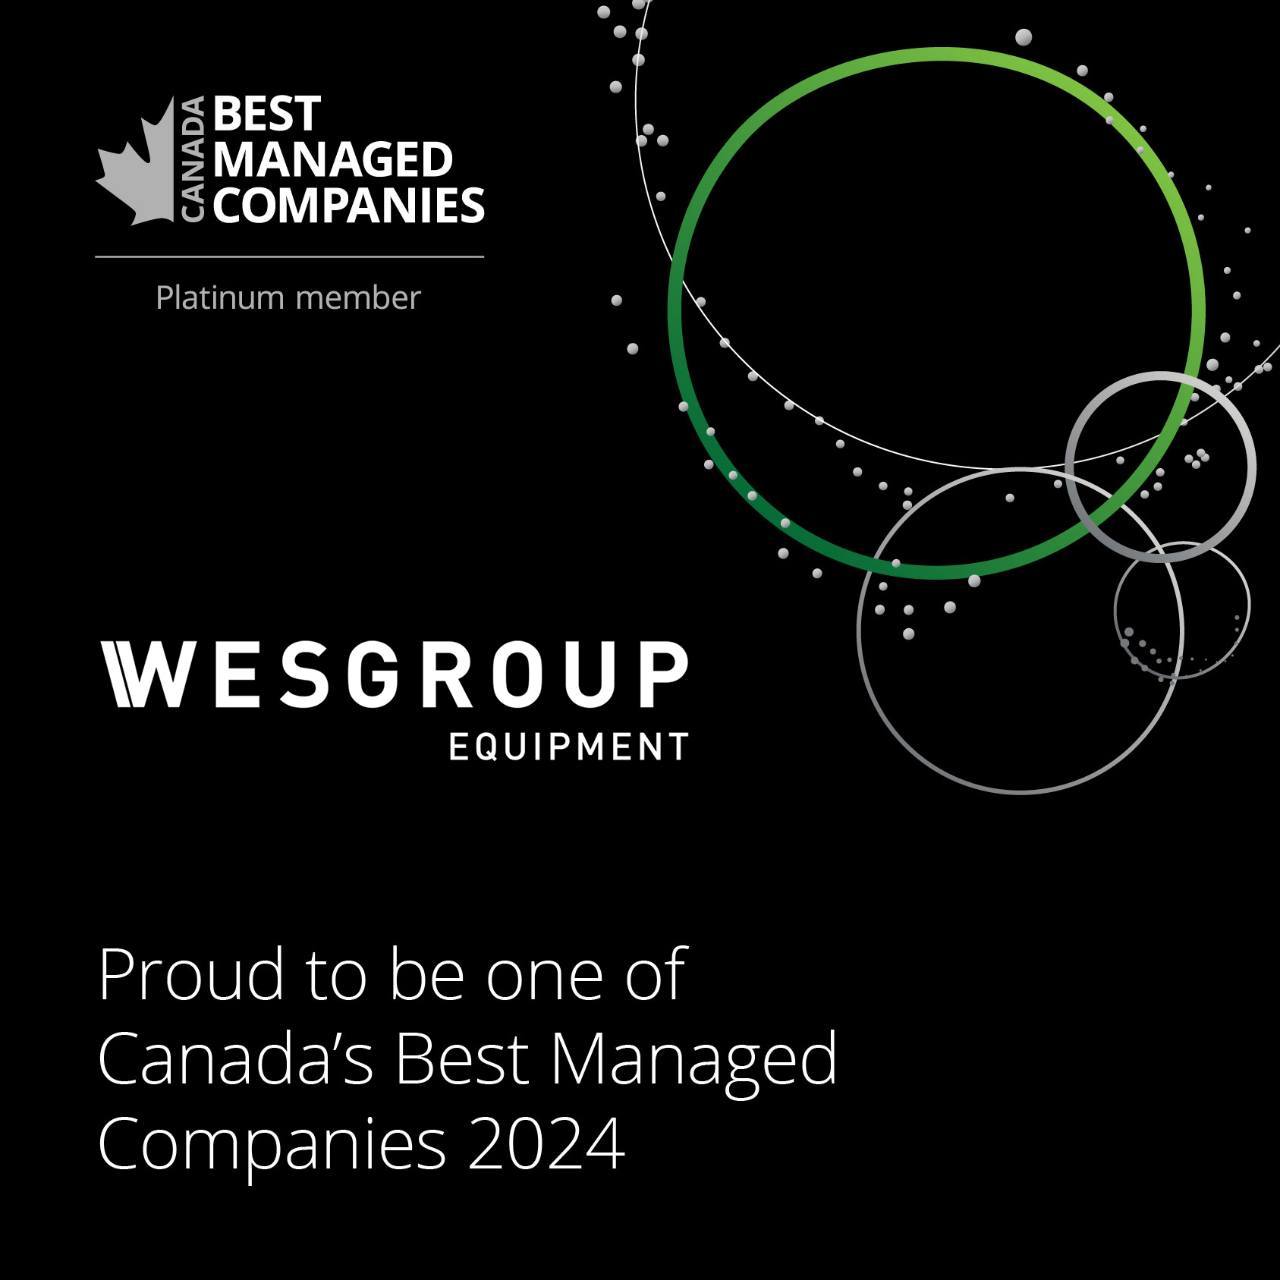 🌟𝗖𝗲𝗹𝗲𝗯𝗿𝗮𝘁𝗶𝗻𝗴 𝗣𝗹𝗮𝘁𝗶𝗻𝘂𝗺 𝗿𝗲𝗰𝗼𝗴𝗻𝗶𝘁𝗶𝗼𝗻!🌟 As an integral part of the Wesgroup Equipment family of brands, Westerra Equipment proudly shares in the excitement of Wesgroup Equipment achieving Platinum status in Canada’s Best Managed Companies, after retaining our Best Managed designation for 7 consecutive years. This milestone underscores our commitment to excellence and quality in all that we do. Celebrate with us as we continue to lead with integrity and innovation!

Read more here:
https://www.wesgroupequipment.com/our-family/news/canadas-best-managed-companies-platinum-winner/

#wesgroupequipmentfamilyofbrands